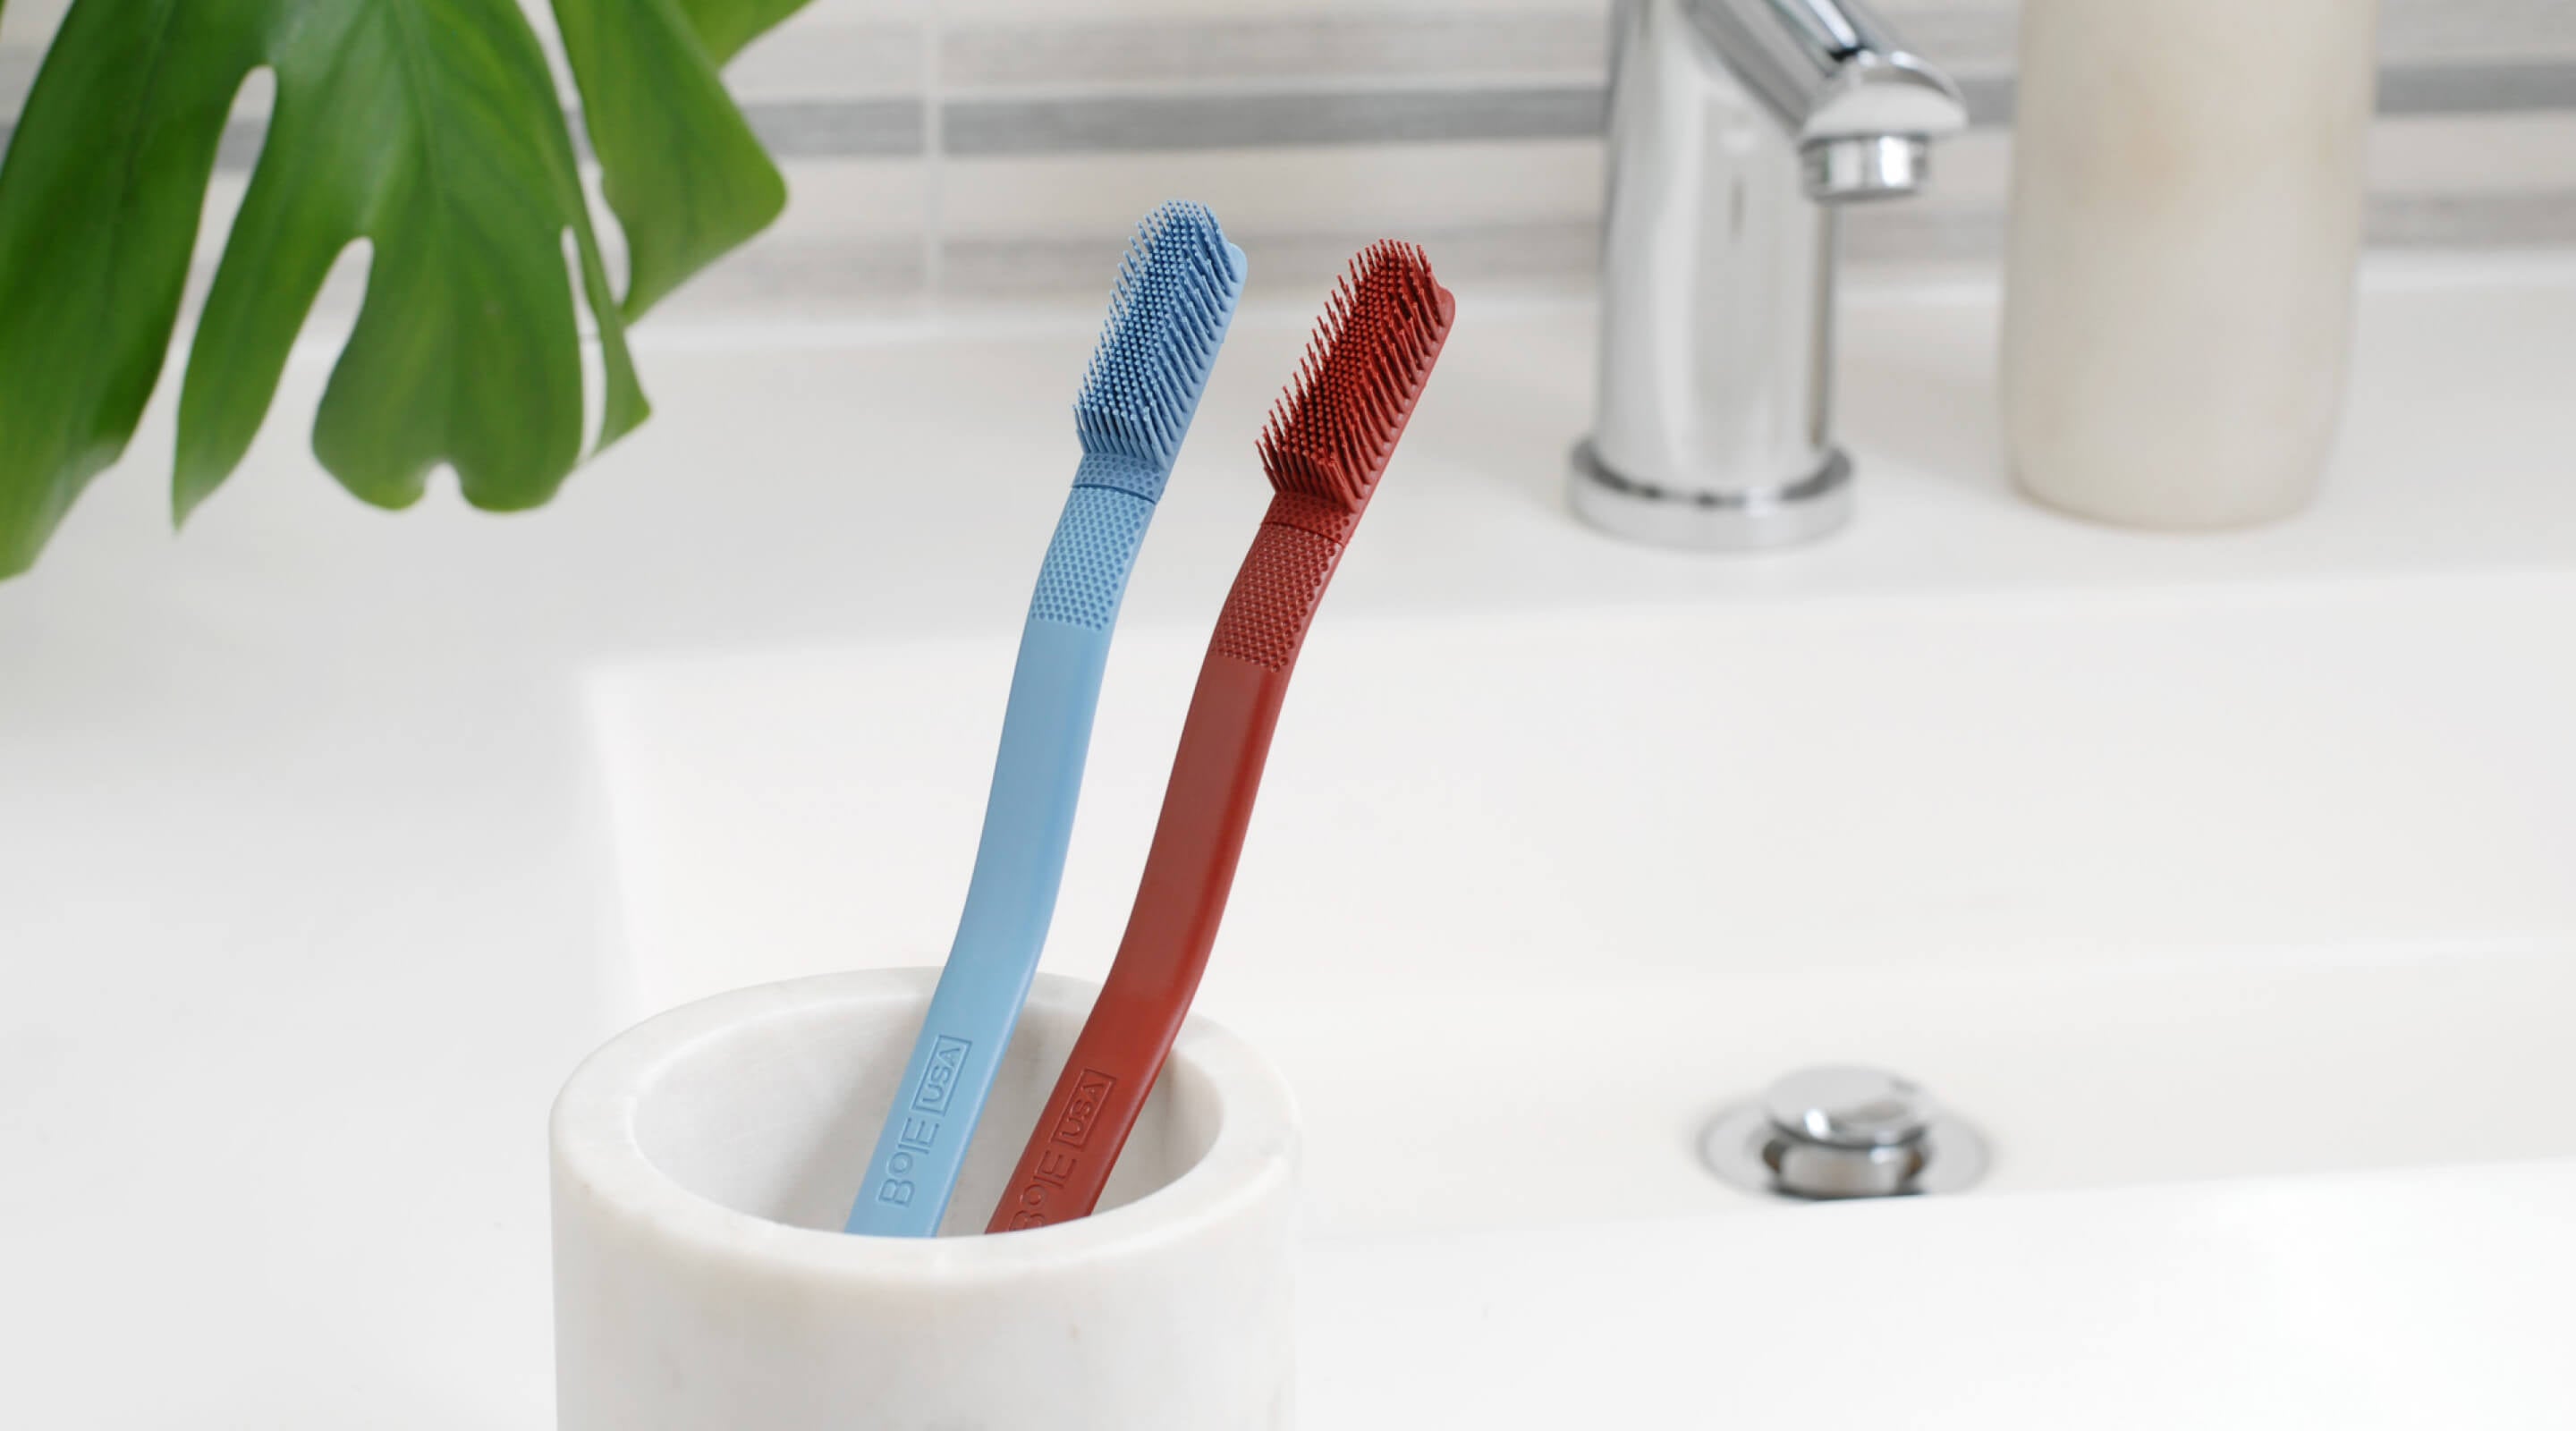 Boie toothbrushes are disposable and eco-friendly.